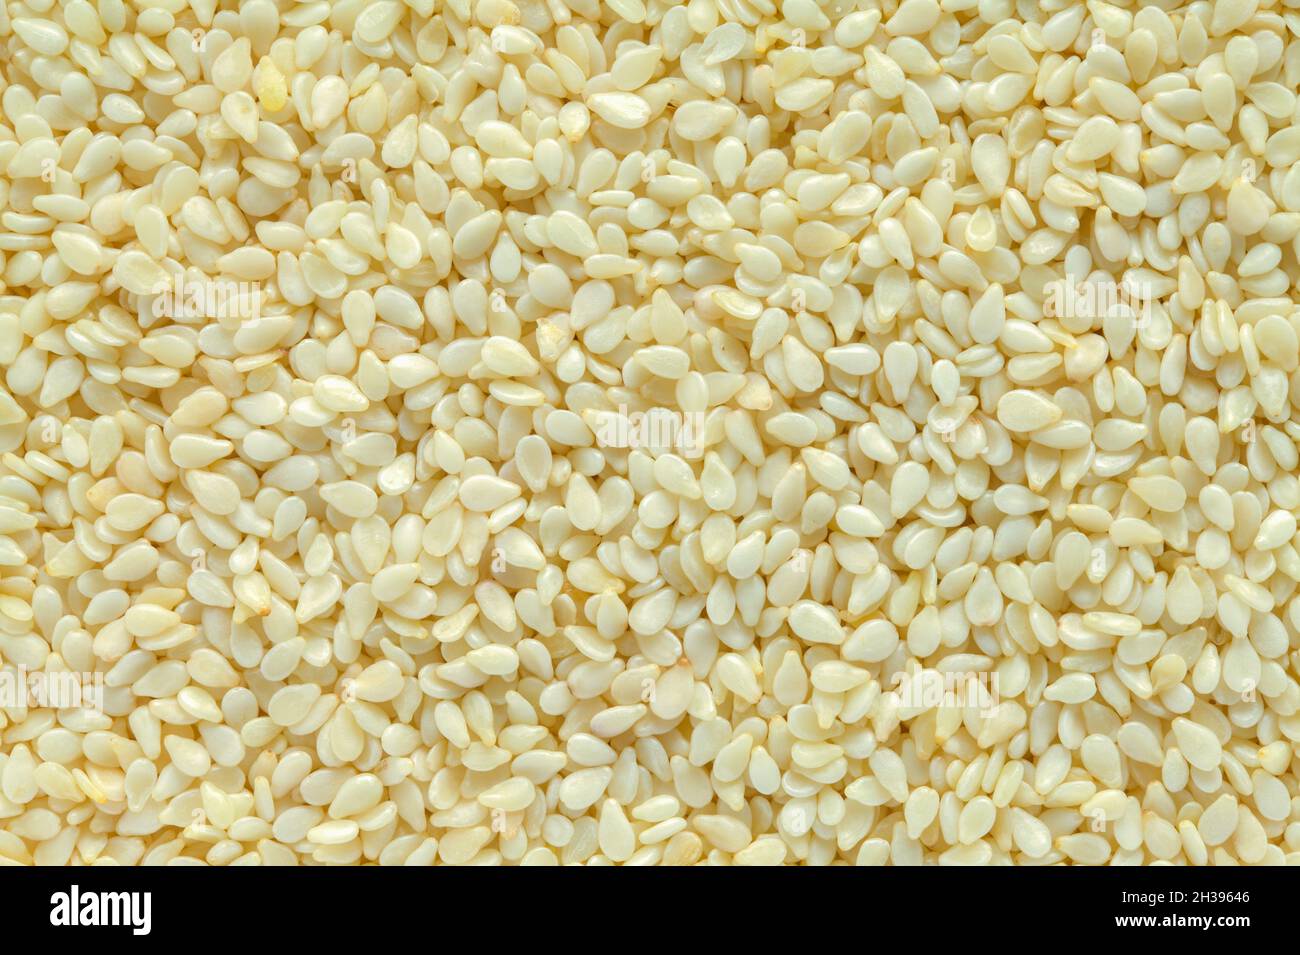 Large Pile of Sesame Seeds Background Texture. Stock Photo